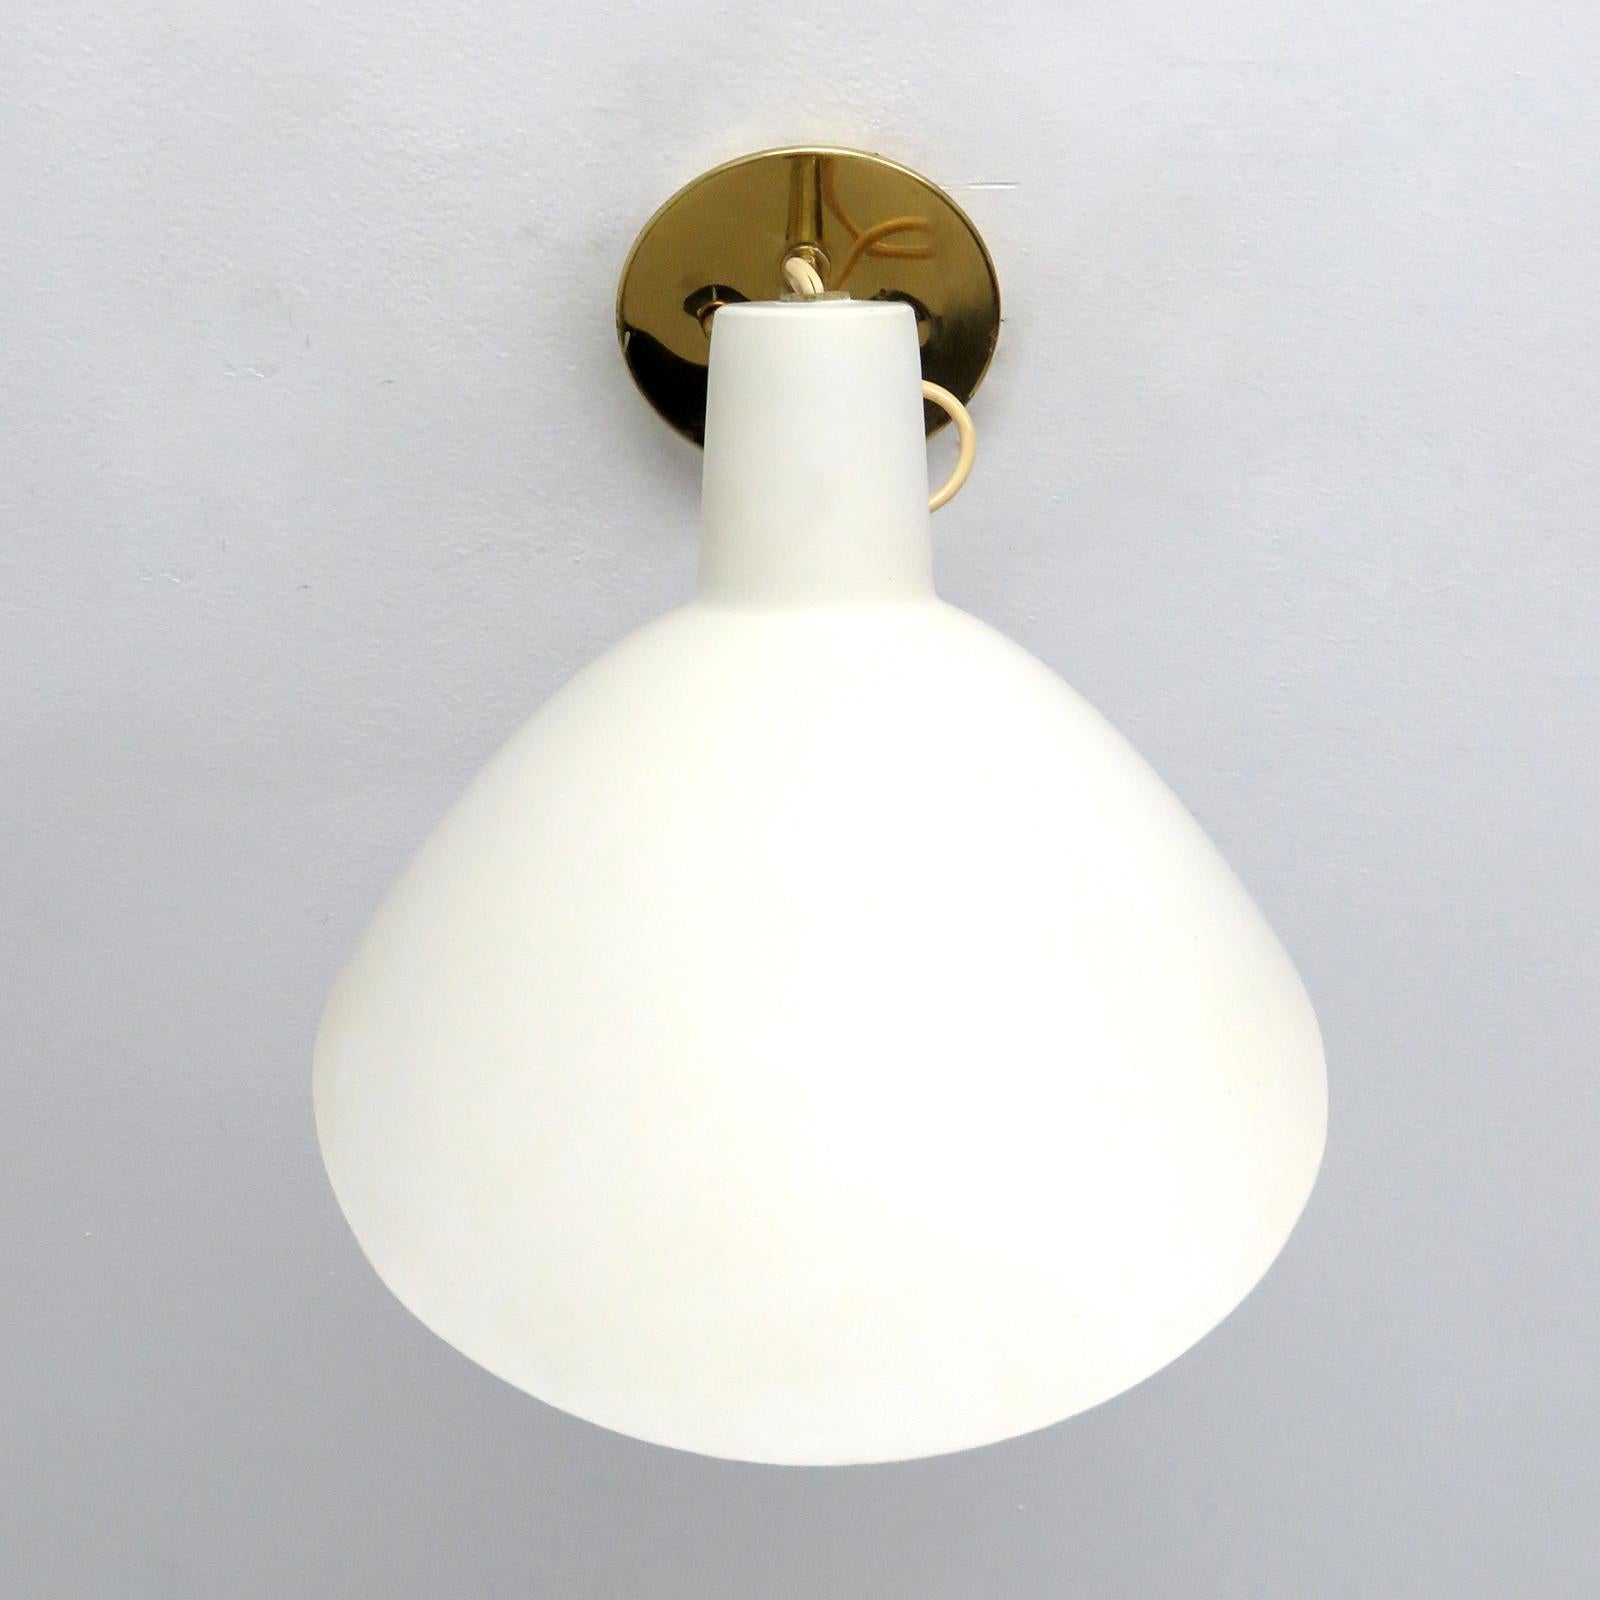 Enameled Wall Light by Vittoriano Viganò for Arteluce, 1950 For Sale